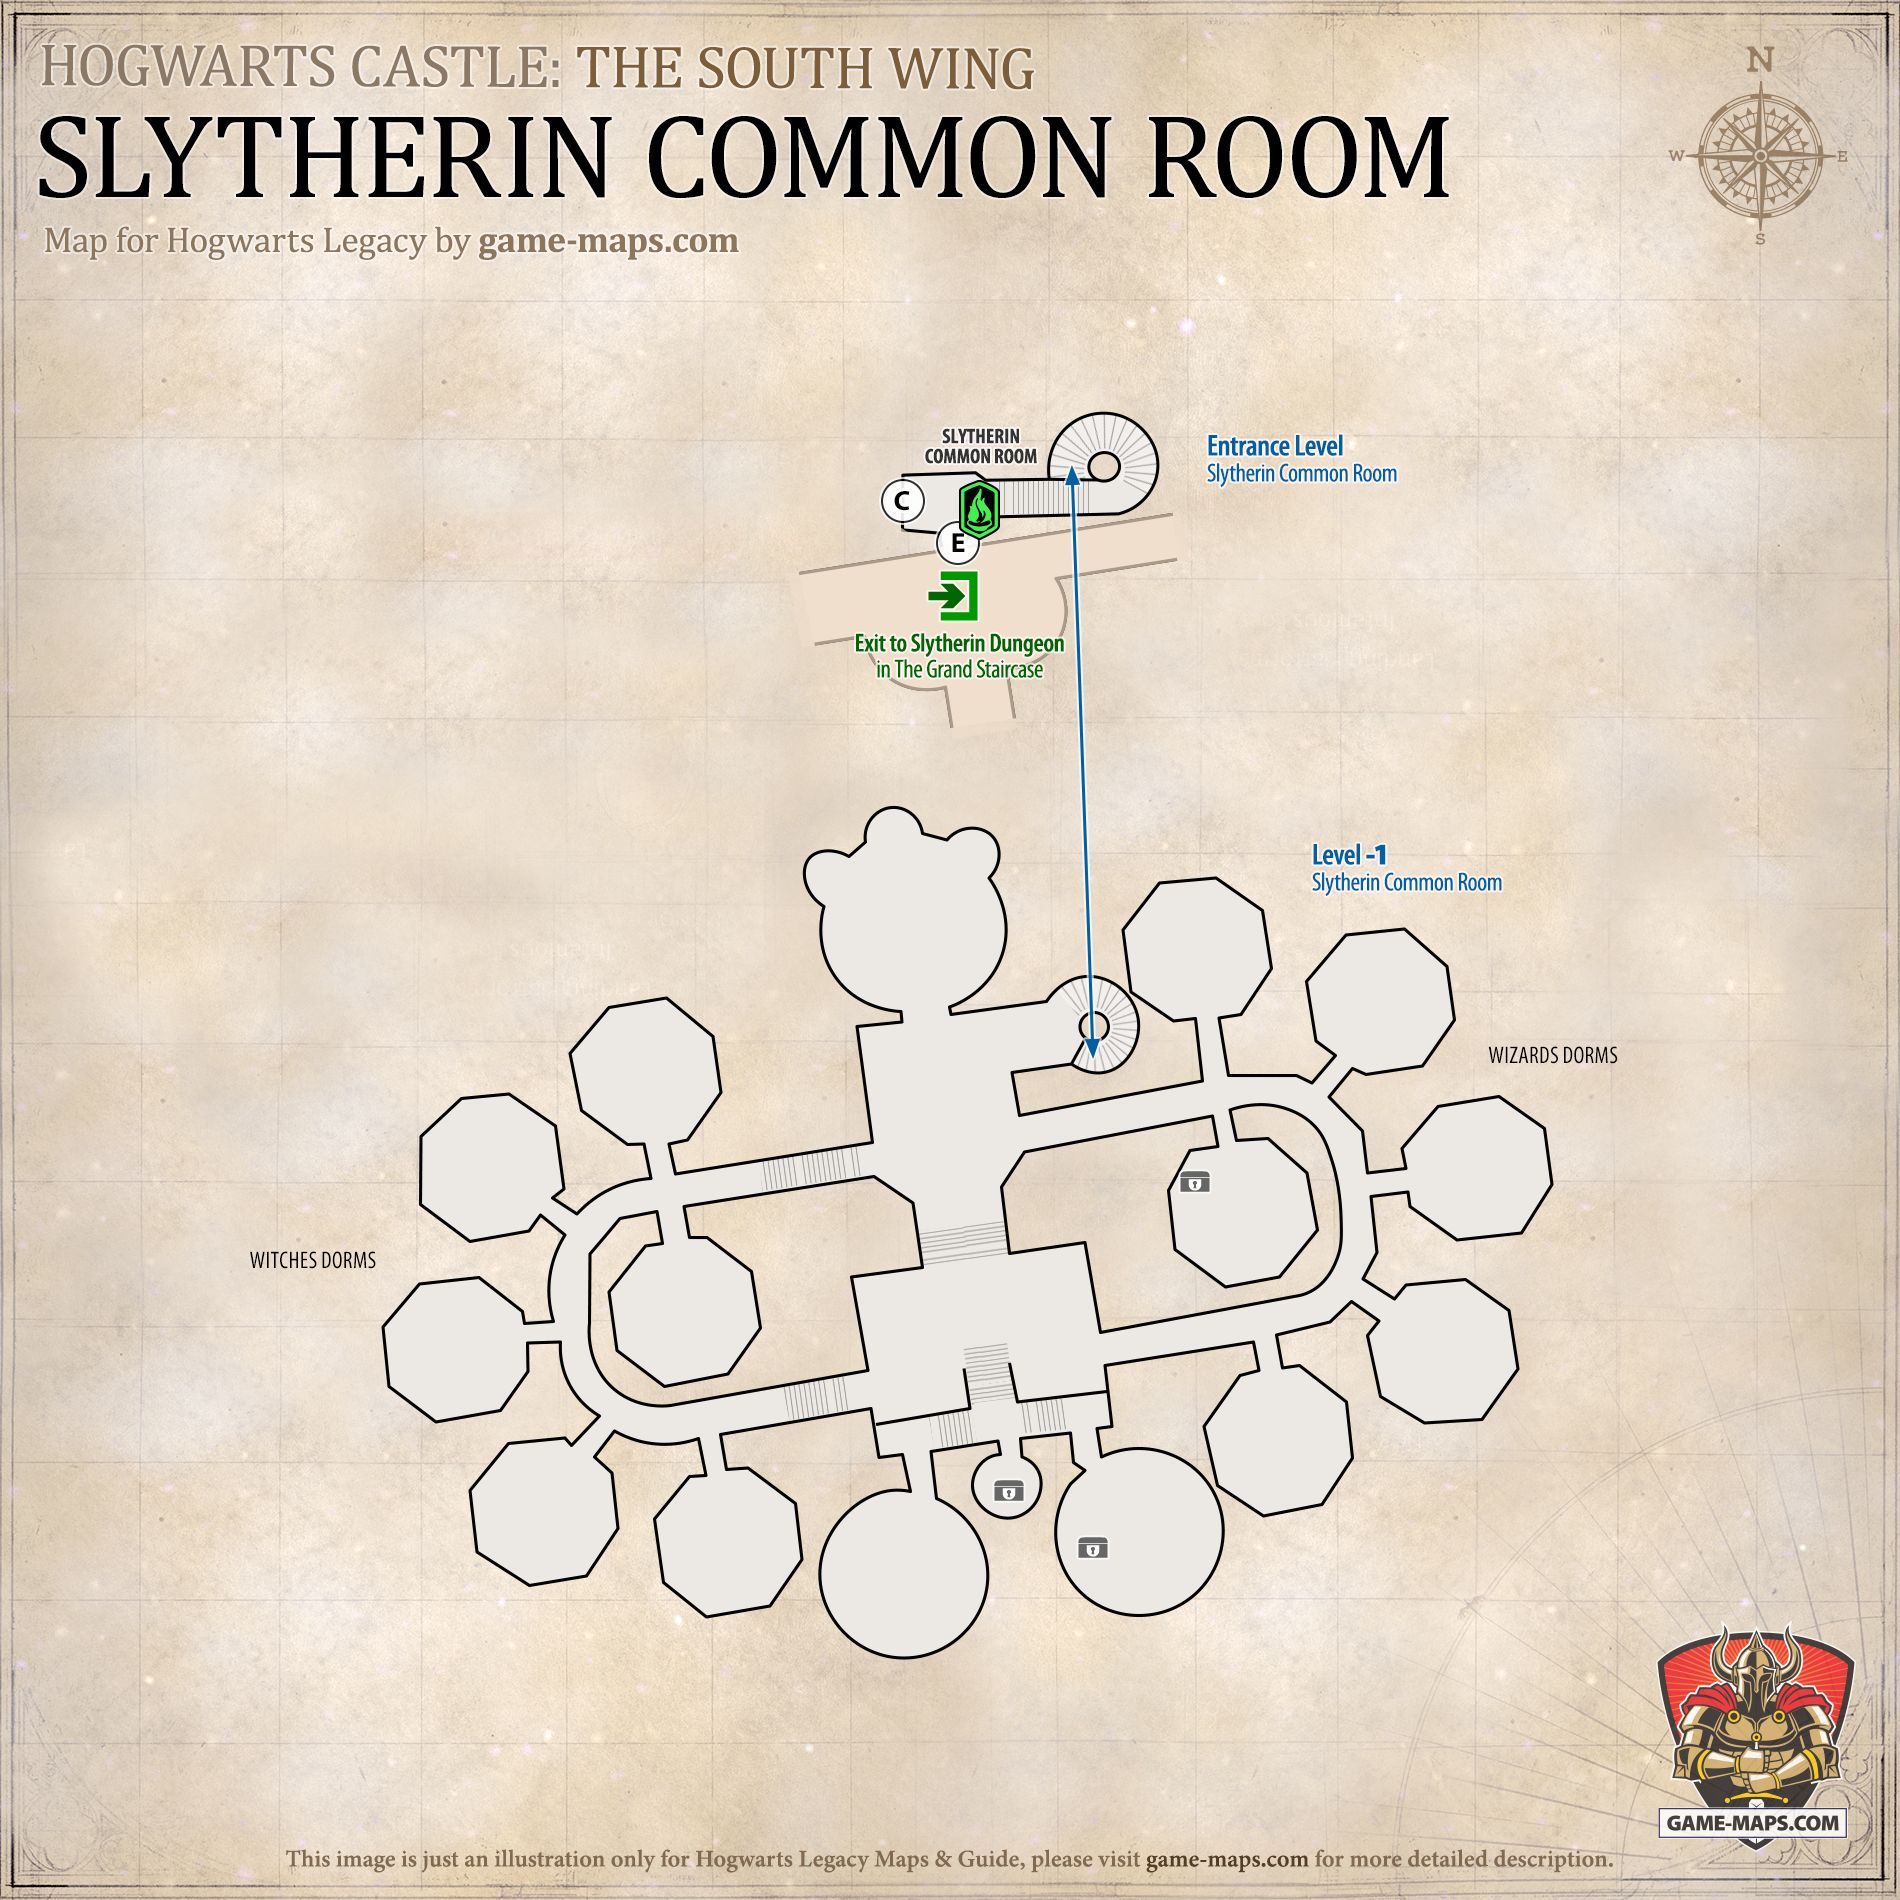 Slytherin Common Room Map for Hogwarts Legacy